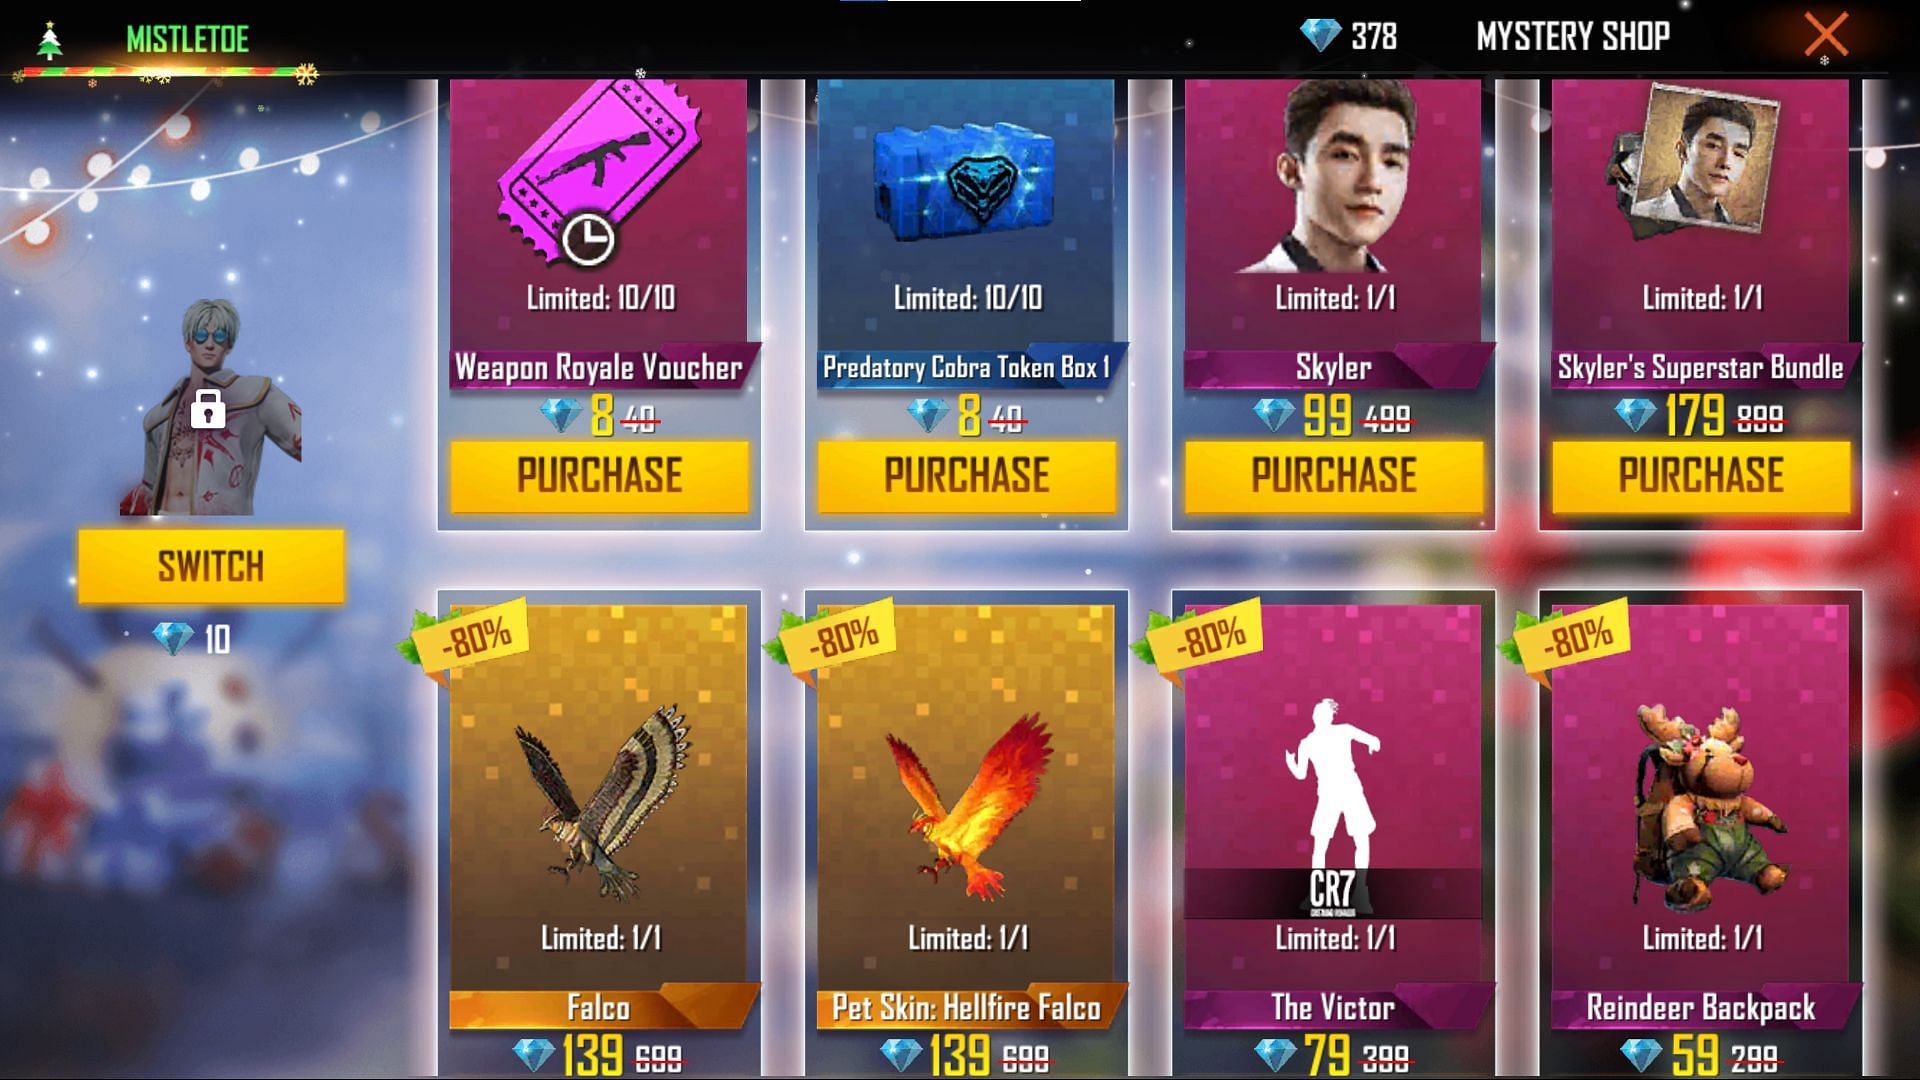 Events like Mystery Shop provide items at discount (Image via Free Fire)